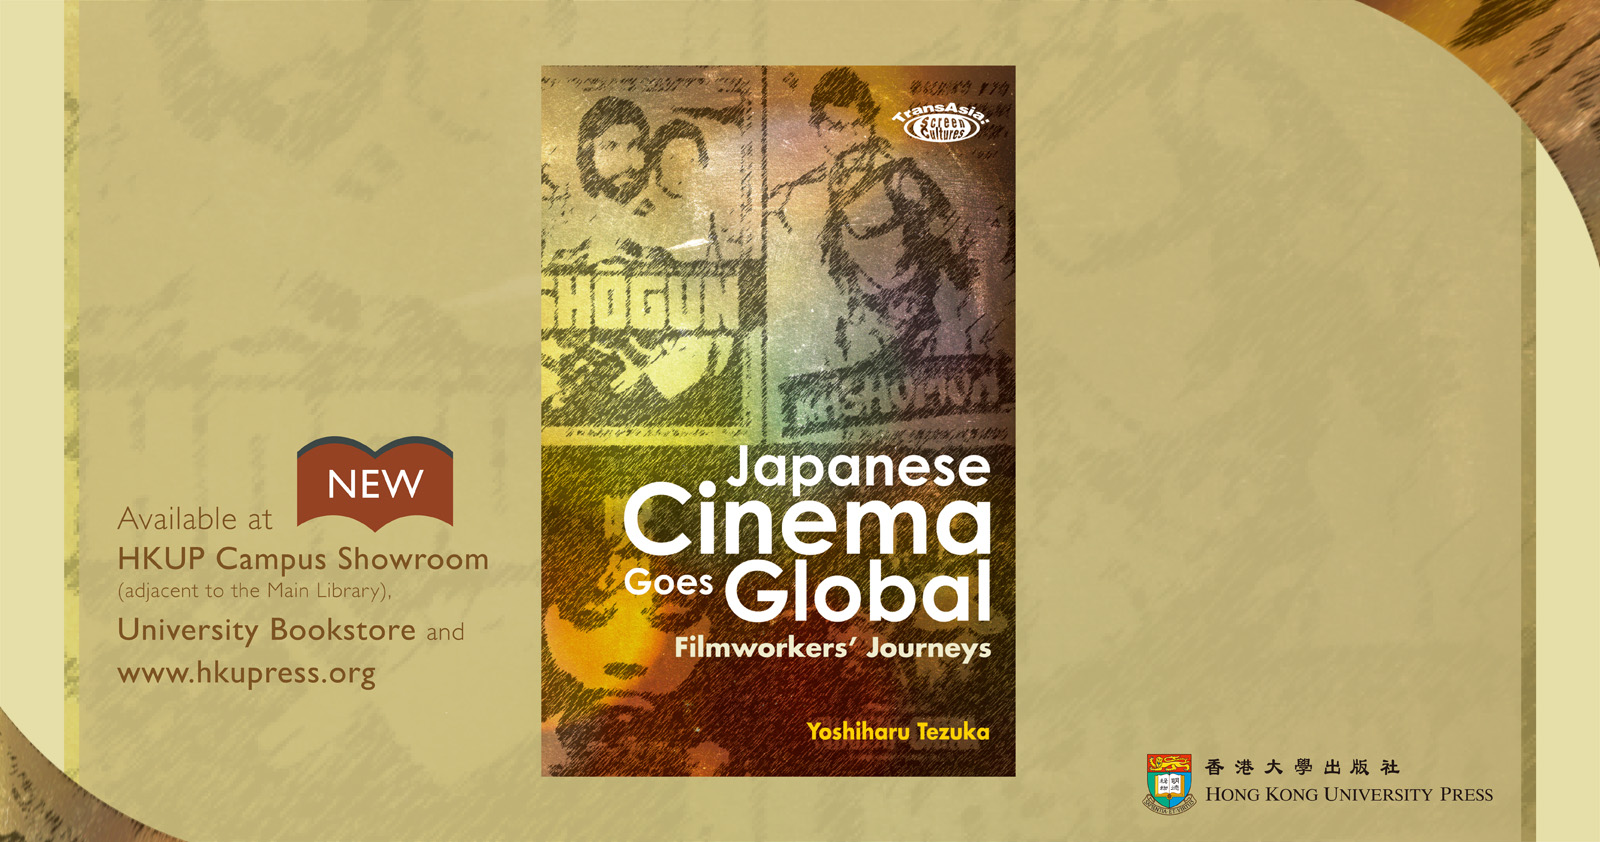 New Book from HKUP - Japanese Cinema Goes Global